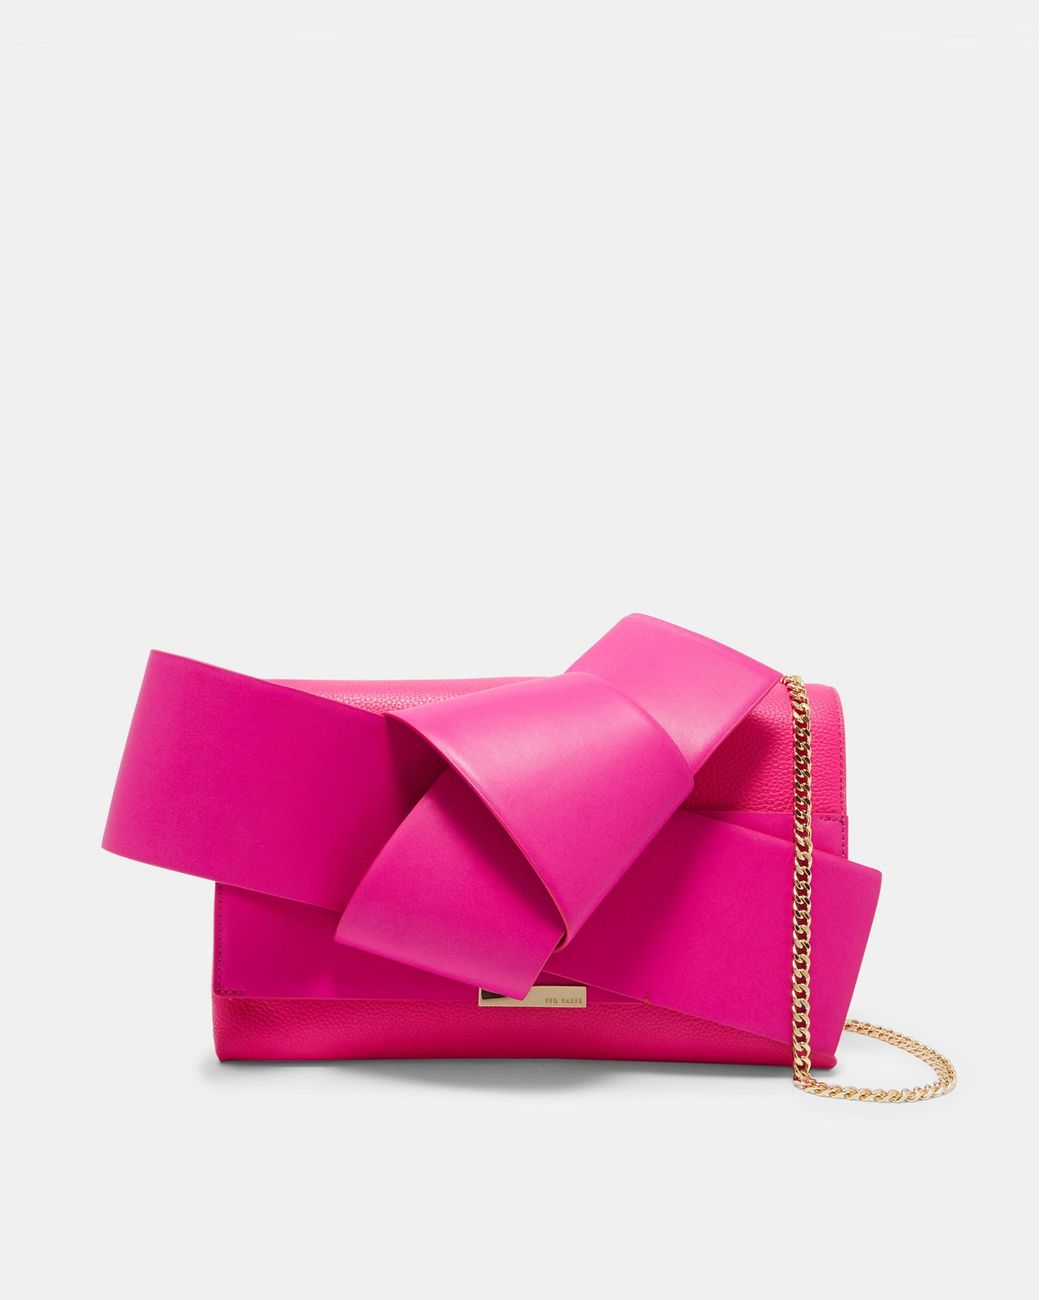 Ted Baker Leather Giant Knot Bow Clutch Bag in Bright Pink (Pink) | Lyst  Australia